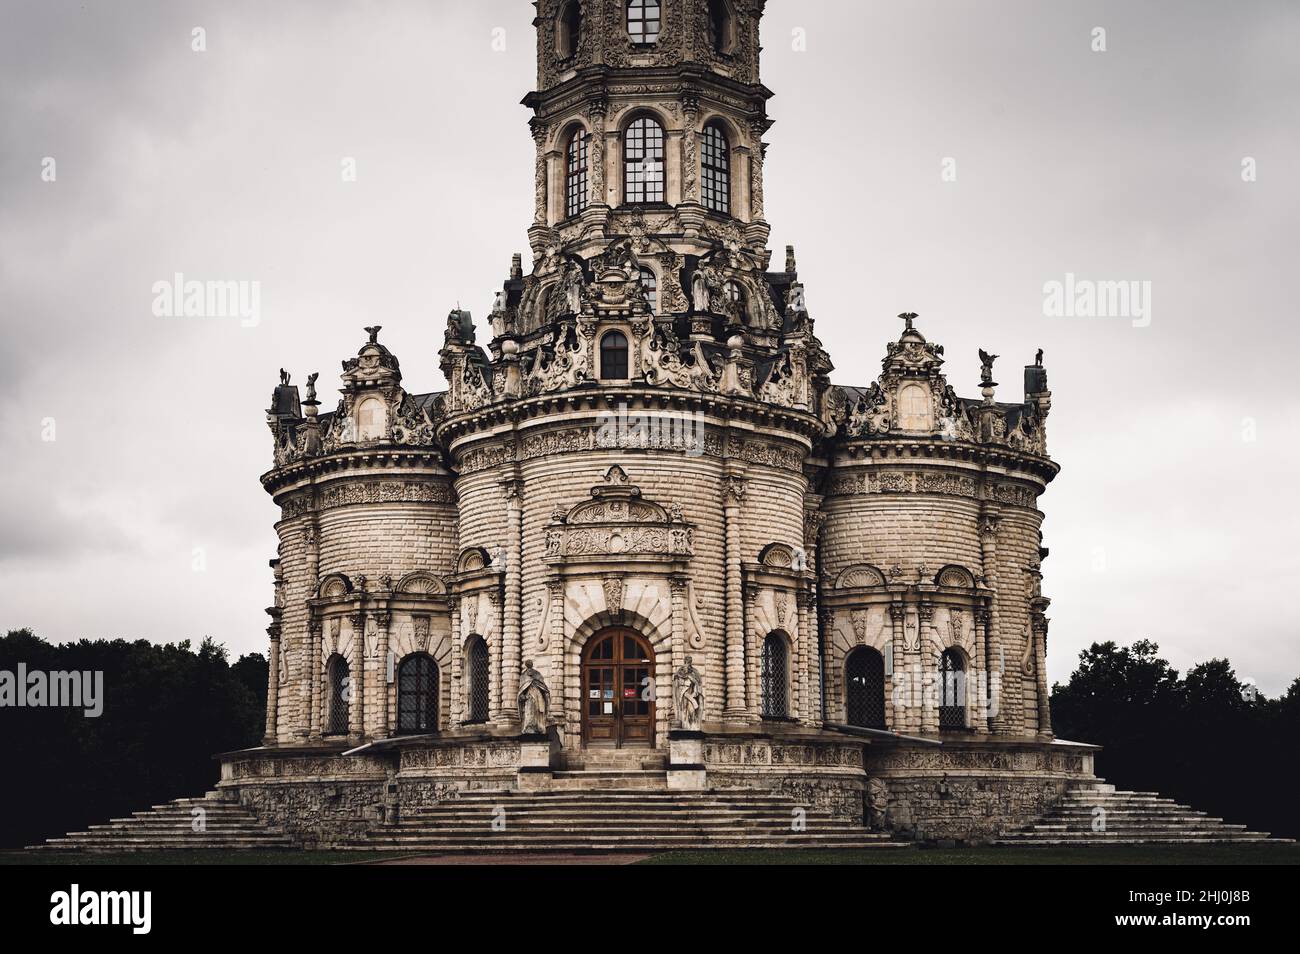 Russia, Dubrovitsy 06.29.2021 exterior of the Orthodox building church Sign of the Most Holy Theotokos temple in style of Gothic architecture. gloomy Stock Photo